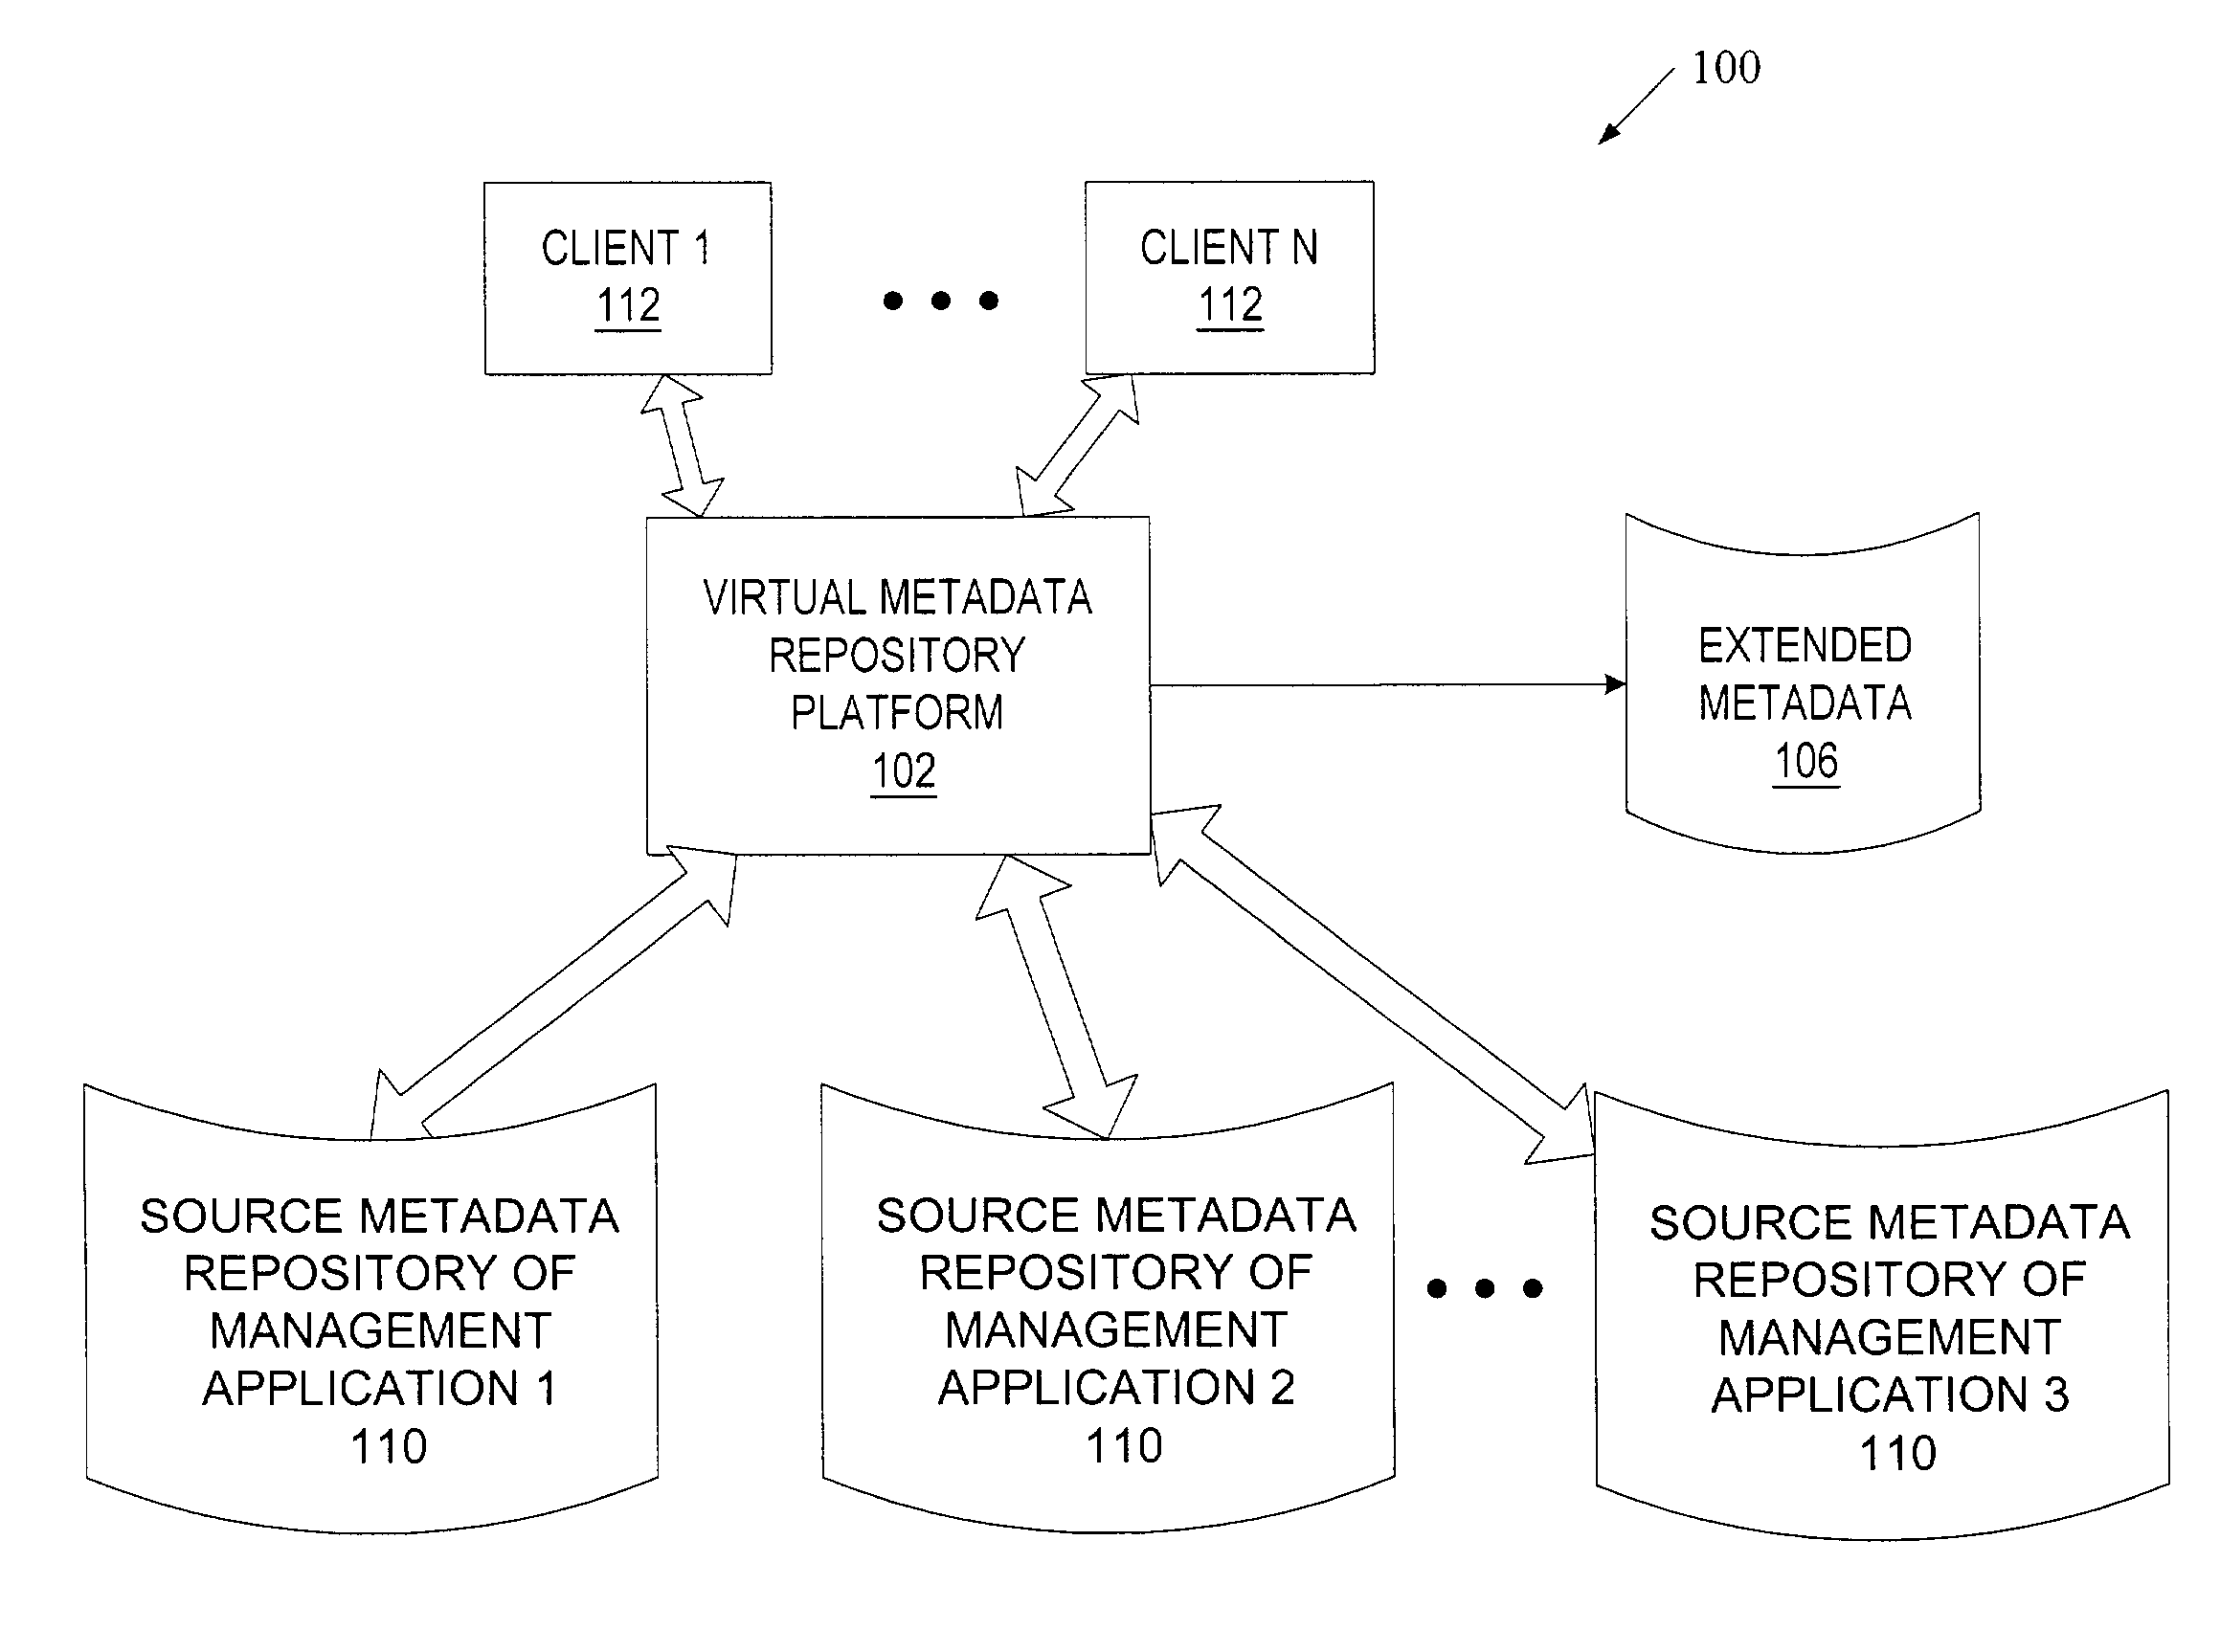 Method and apparatus for obtaining metadata from multiple information sources within an organization in real time